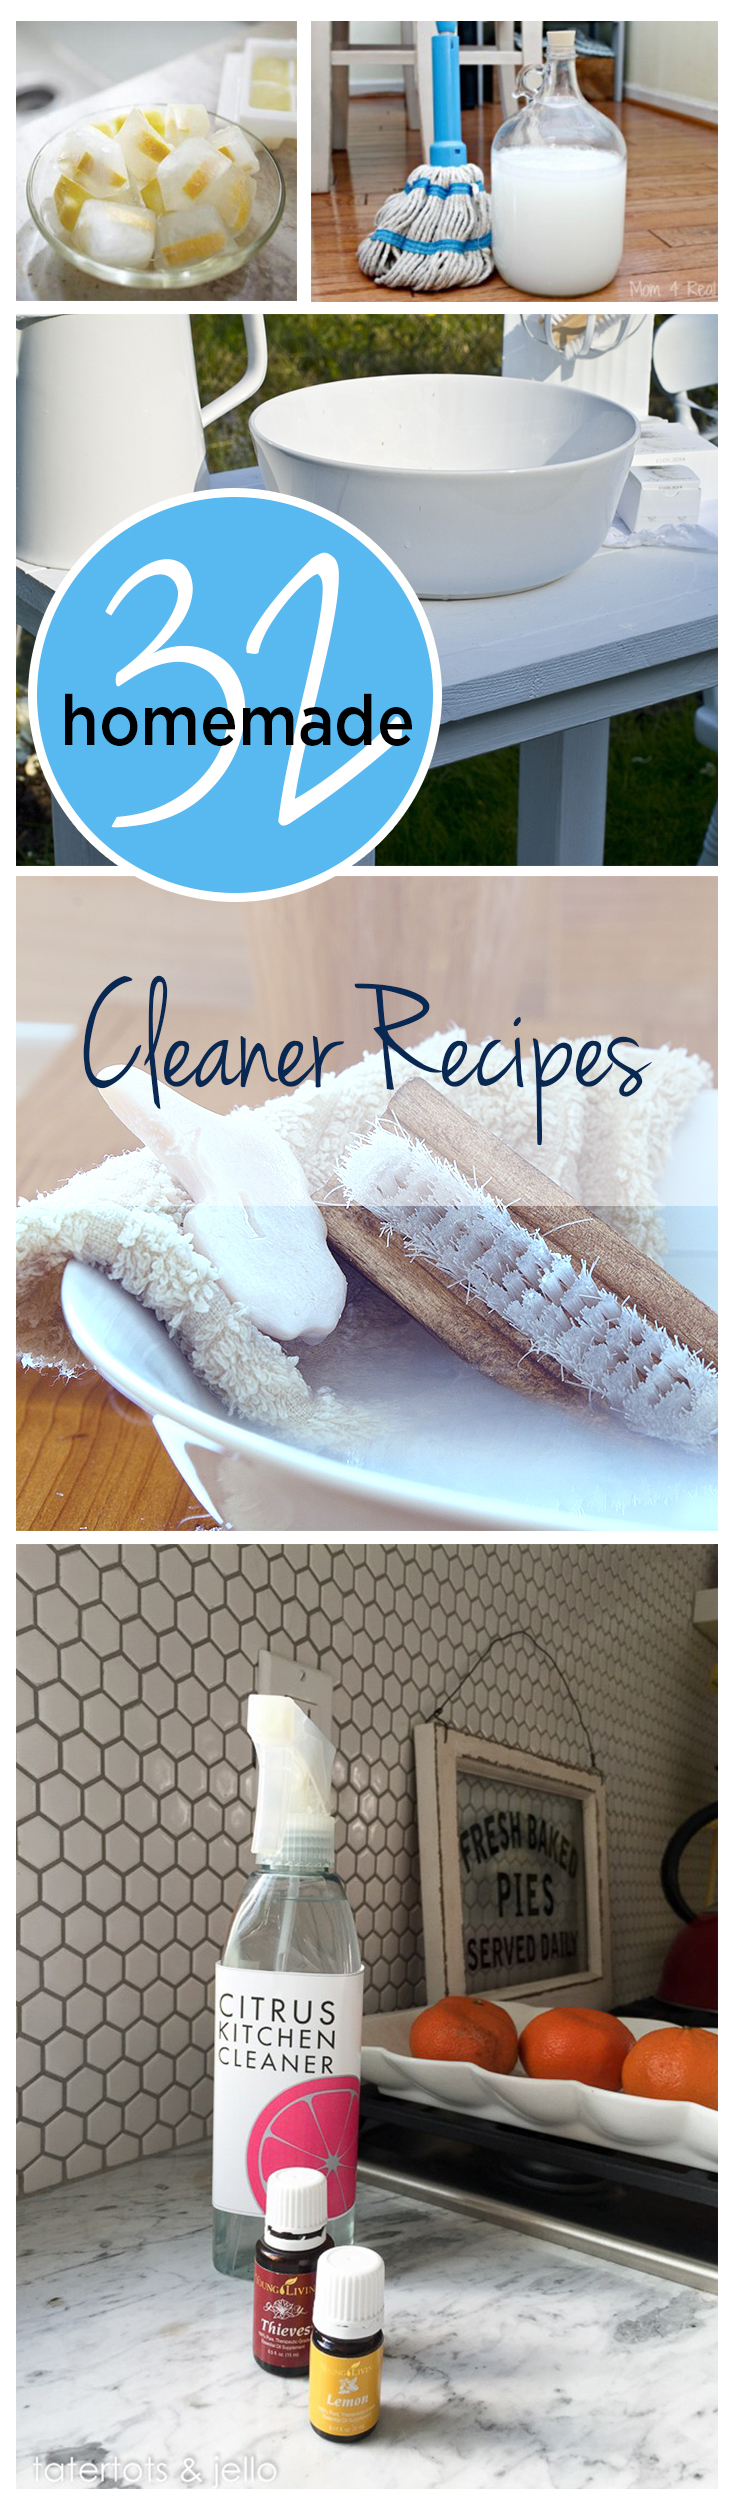 32 Homemade Cleaner Recipes